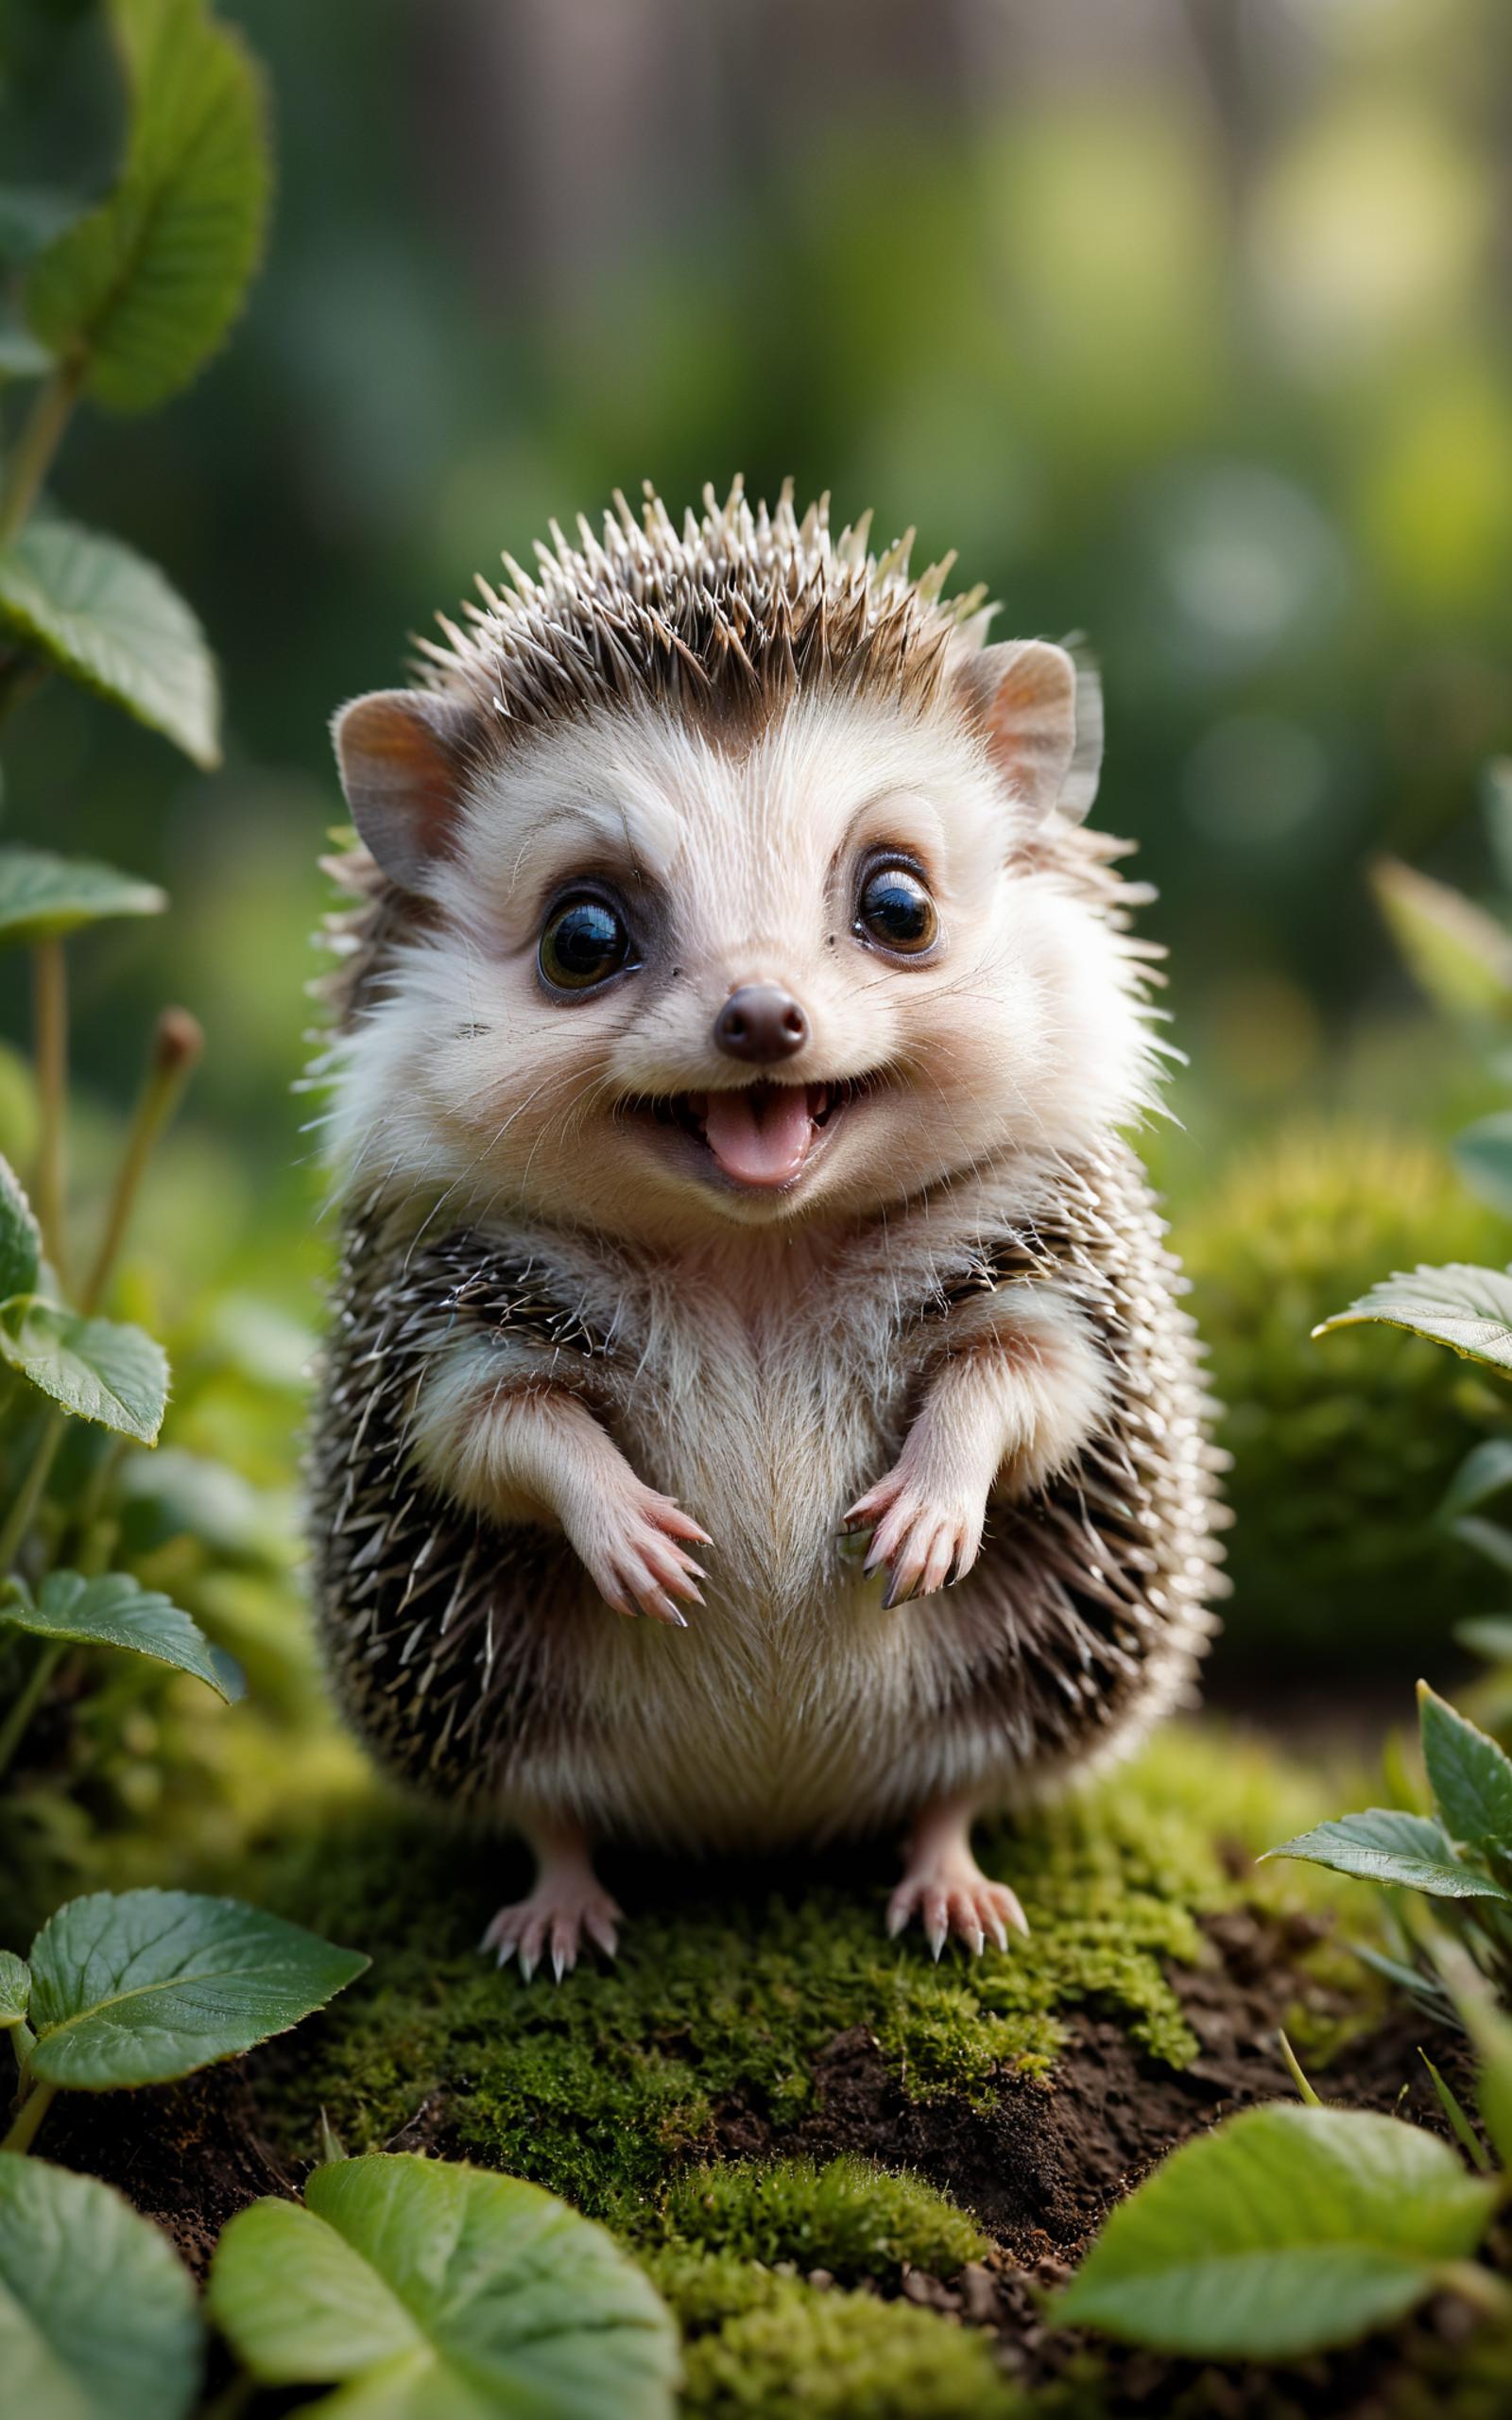 A Small Cute Animal with Large Eyes Posing for a Picture.